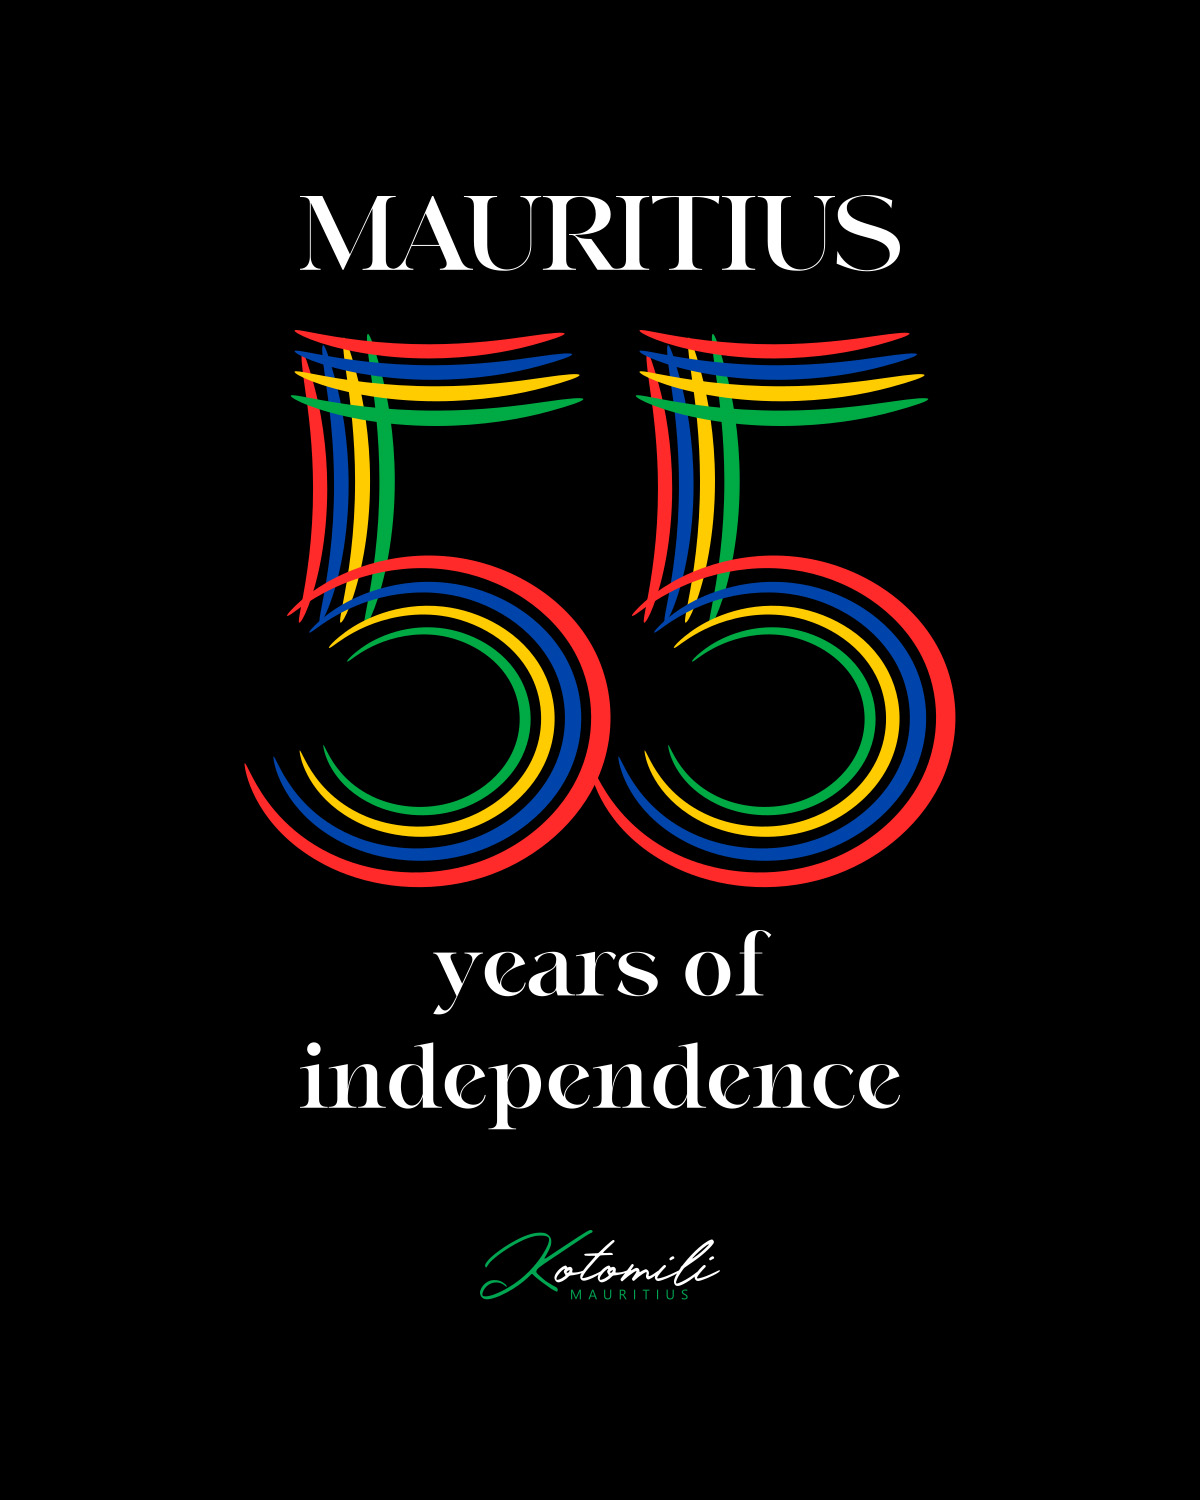 55 years of independence design by Kotomili Mauritius